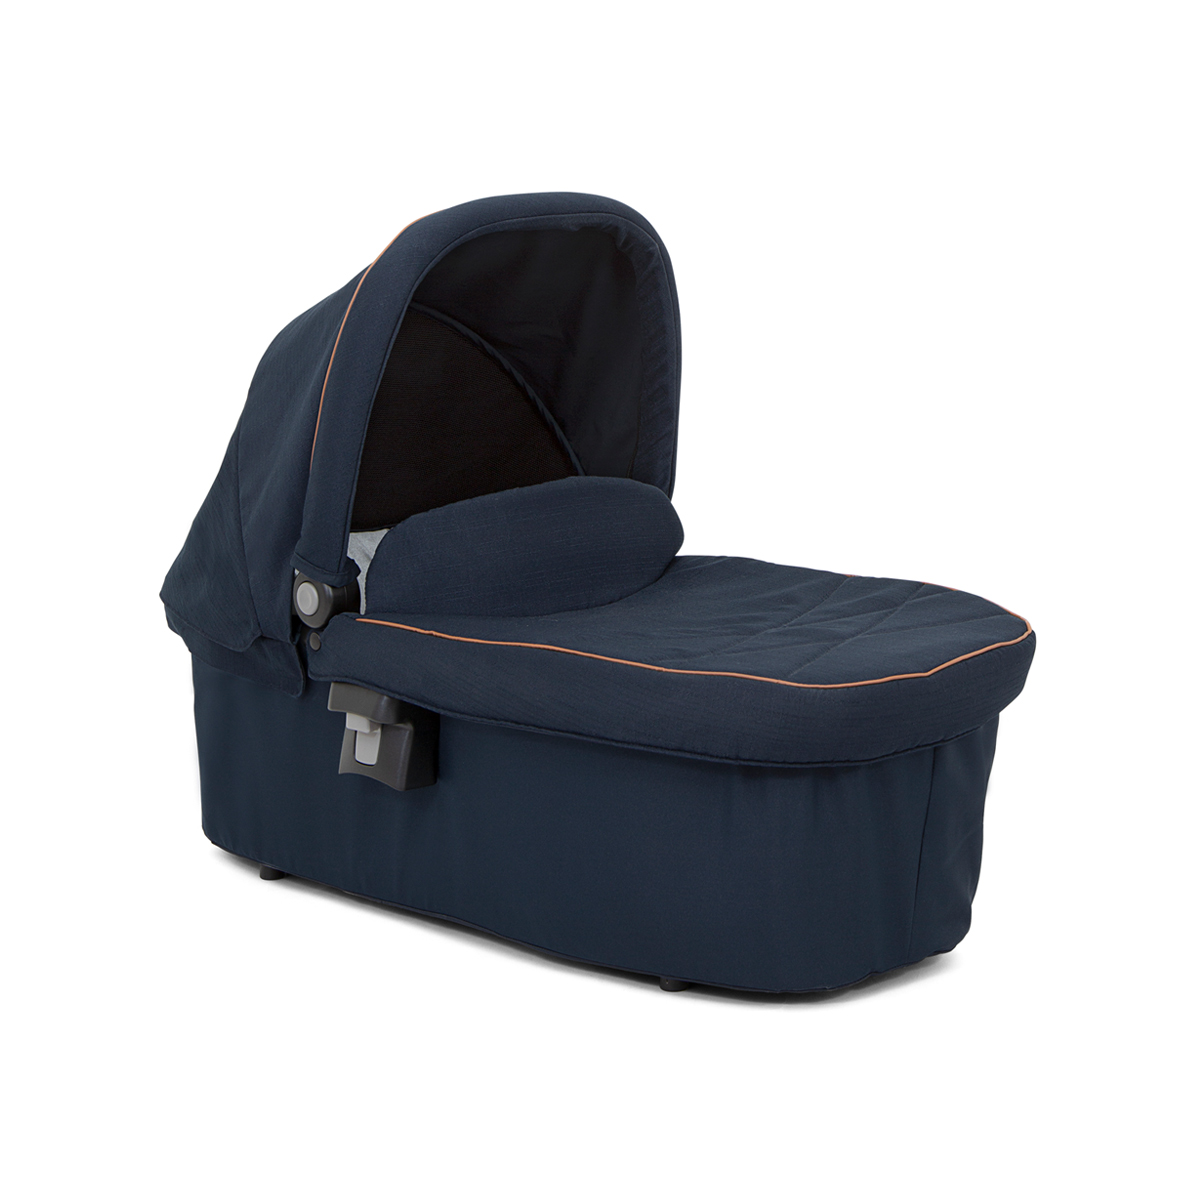 Graco Near2Me carrycot with apron three quarter angle